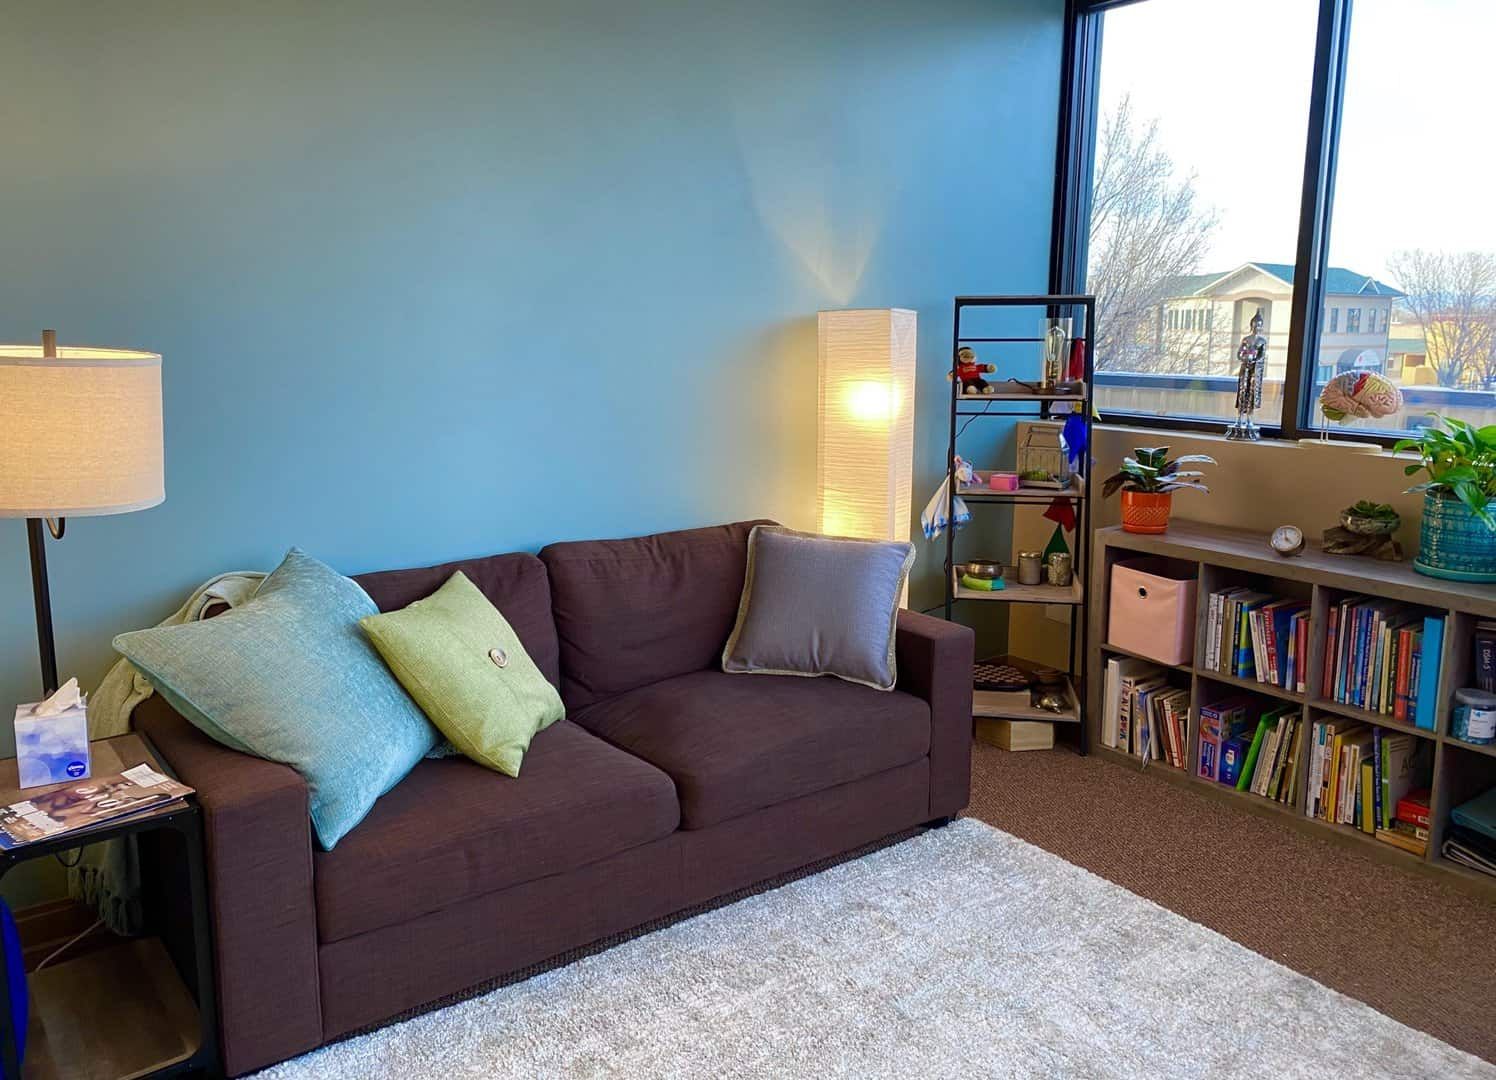 reading area with couch and bookshelves